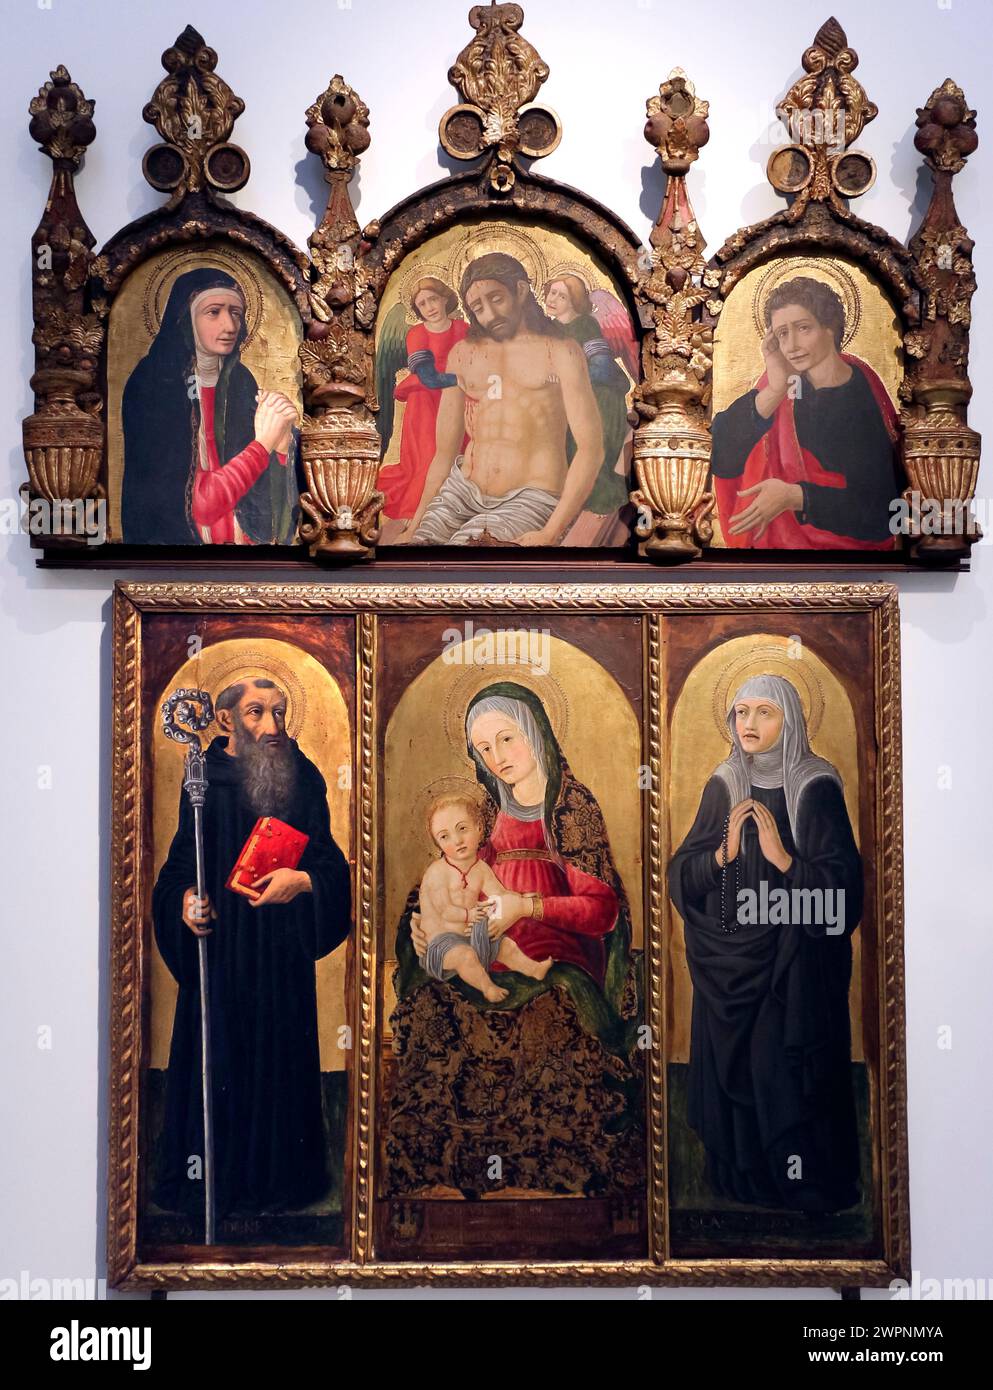 Italy Emilia Romagna Bologna - National Art Gallery - Madonna and Child with Saints Benedict and Juliana by Francesco Pelosio in 1476 Stock Photo